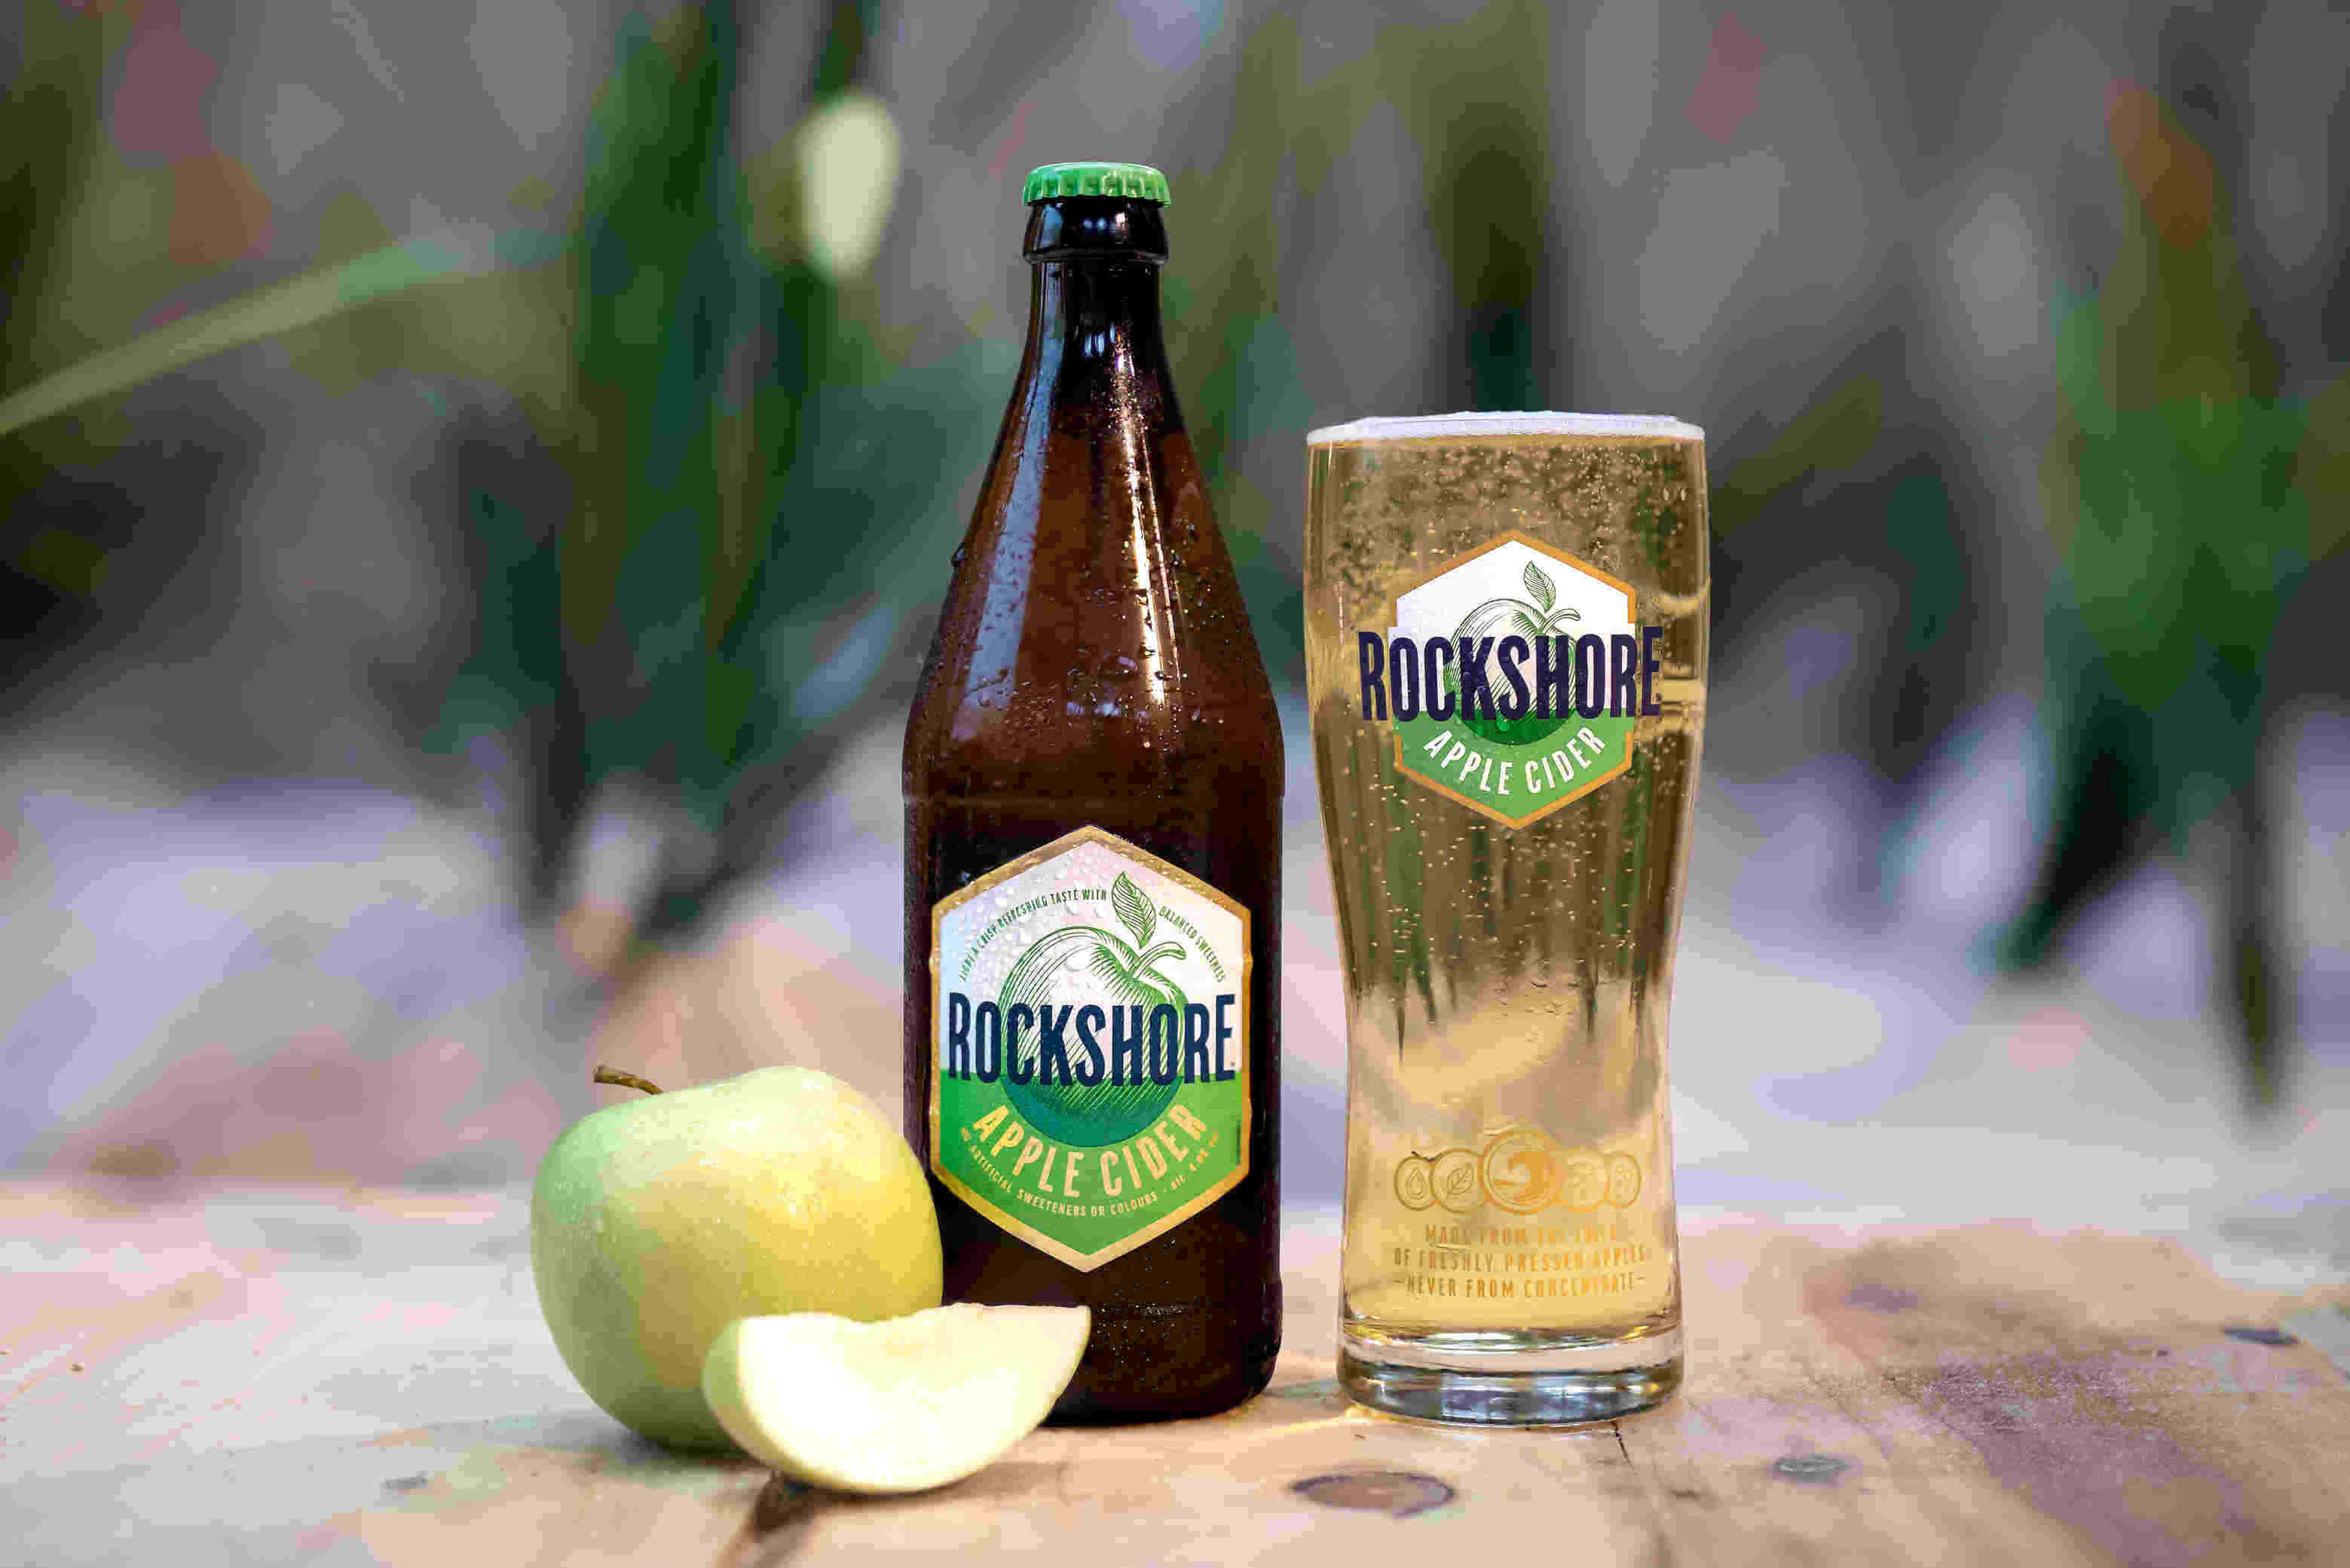 Rockshore Apple Cider has an ABV of 4% and is being rolled out nationally on draught, bottle and can to pubs, off-licences and supermarkets.